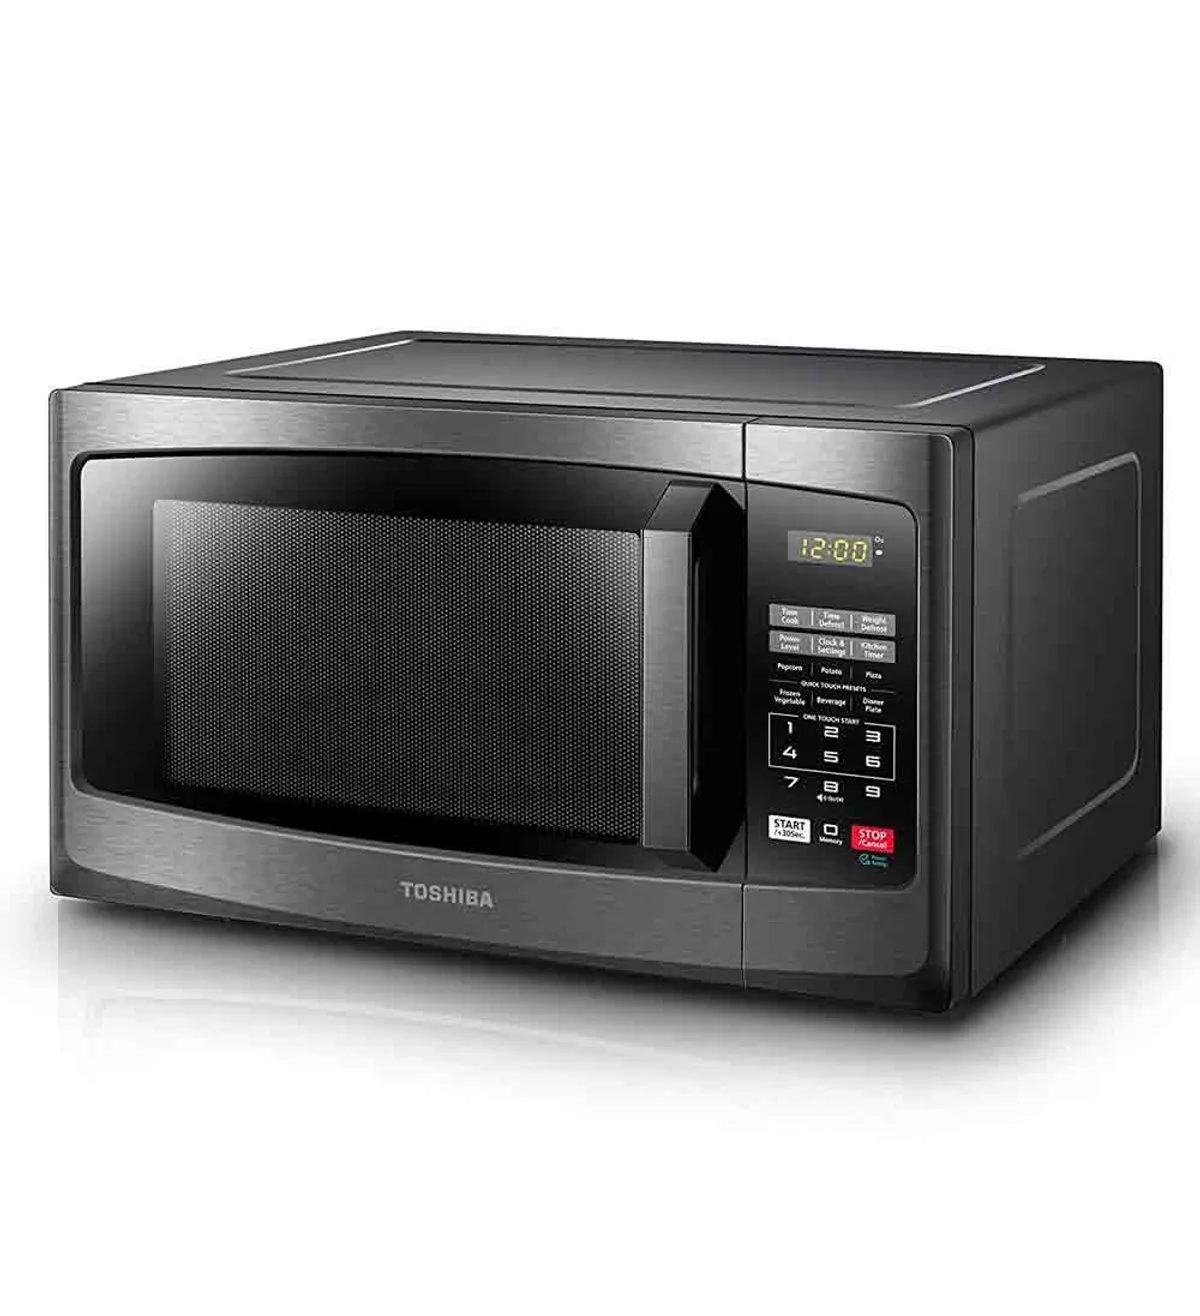 Toshiba EM925A5A BS Microwave Oven Review